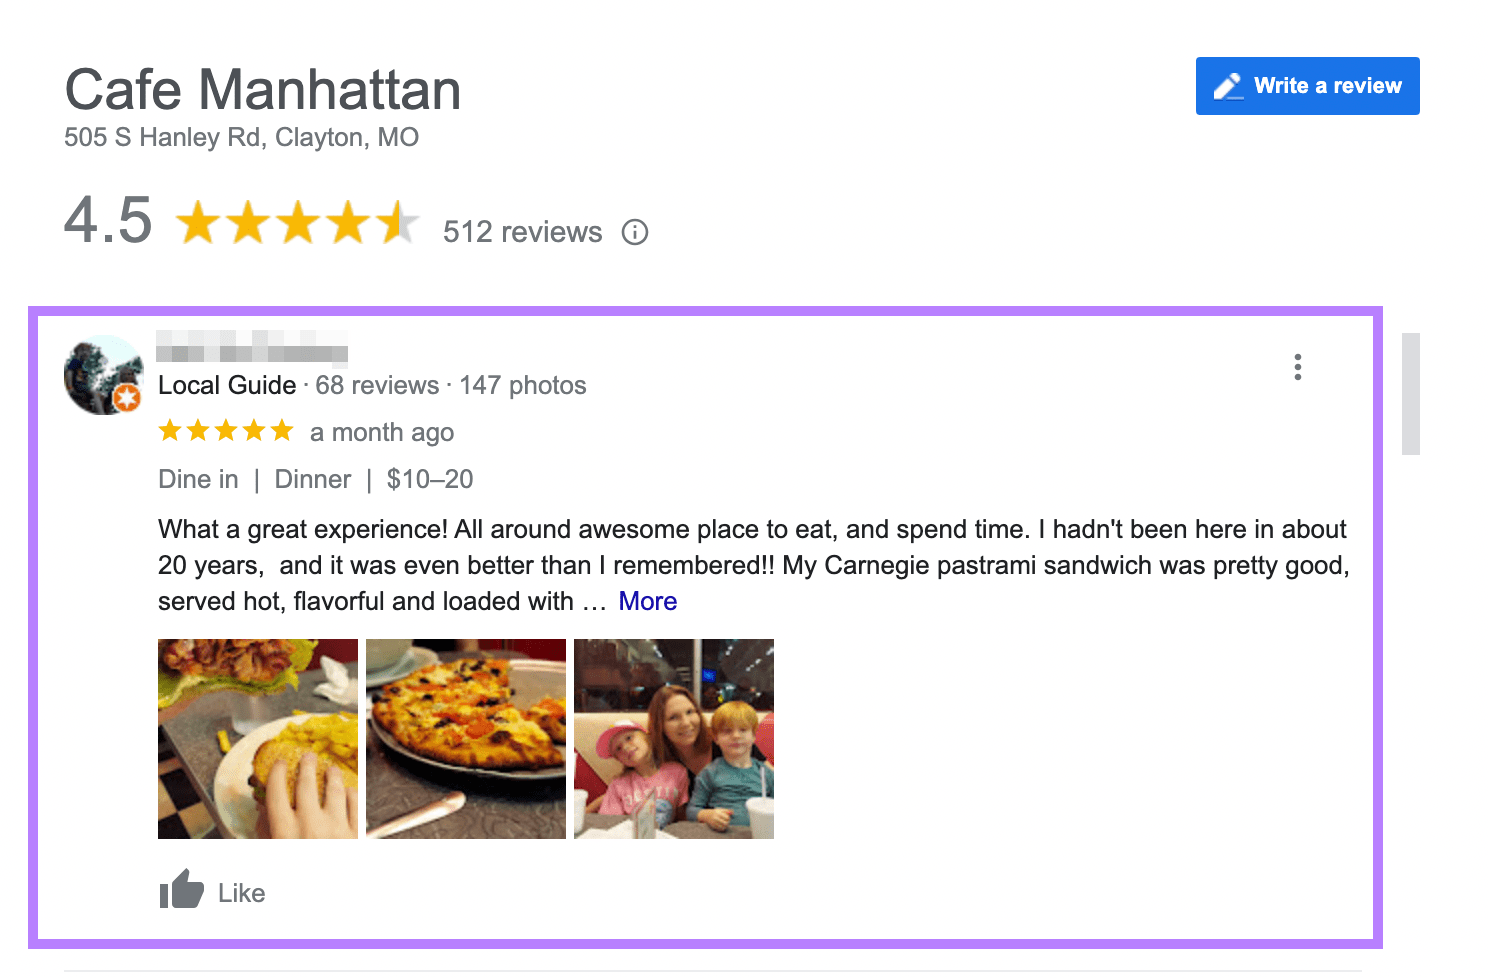 A review on Google for "Cafe Manhattan" which includes a star rating, amount spent, photos, and a description.